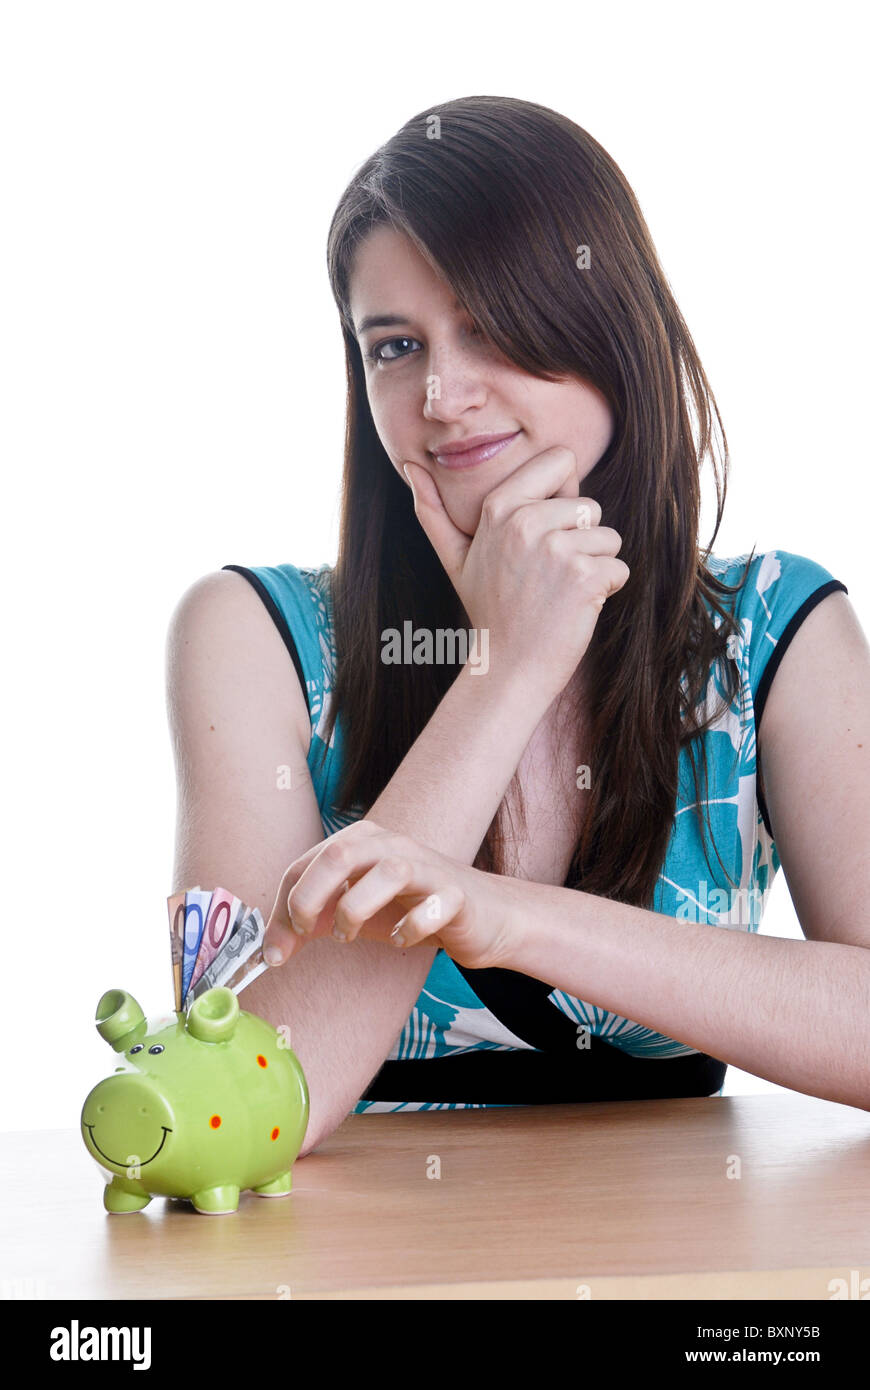 Young woman with her piggy bank Stock Photo